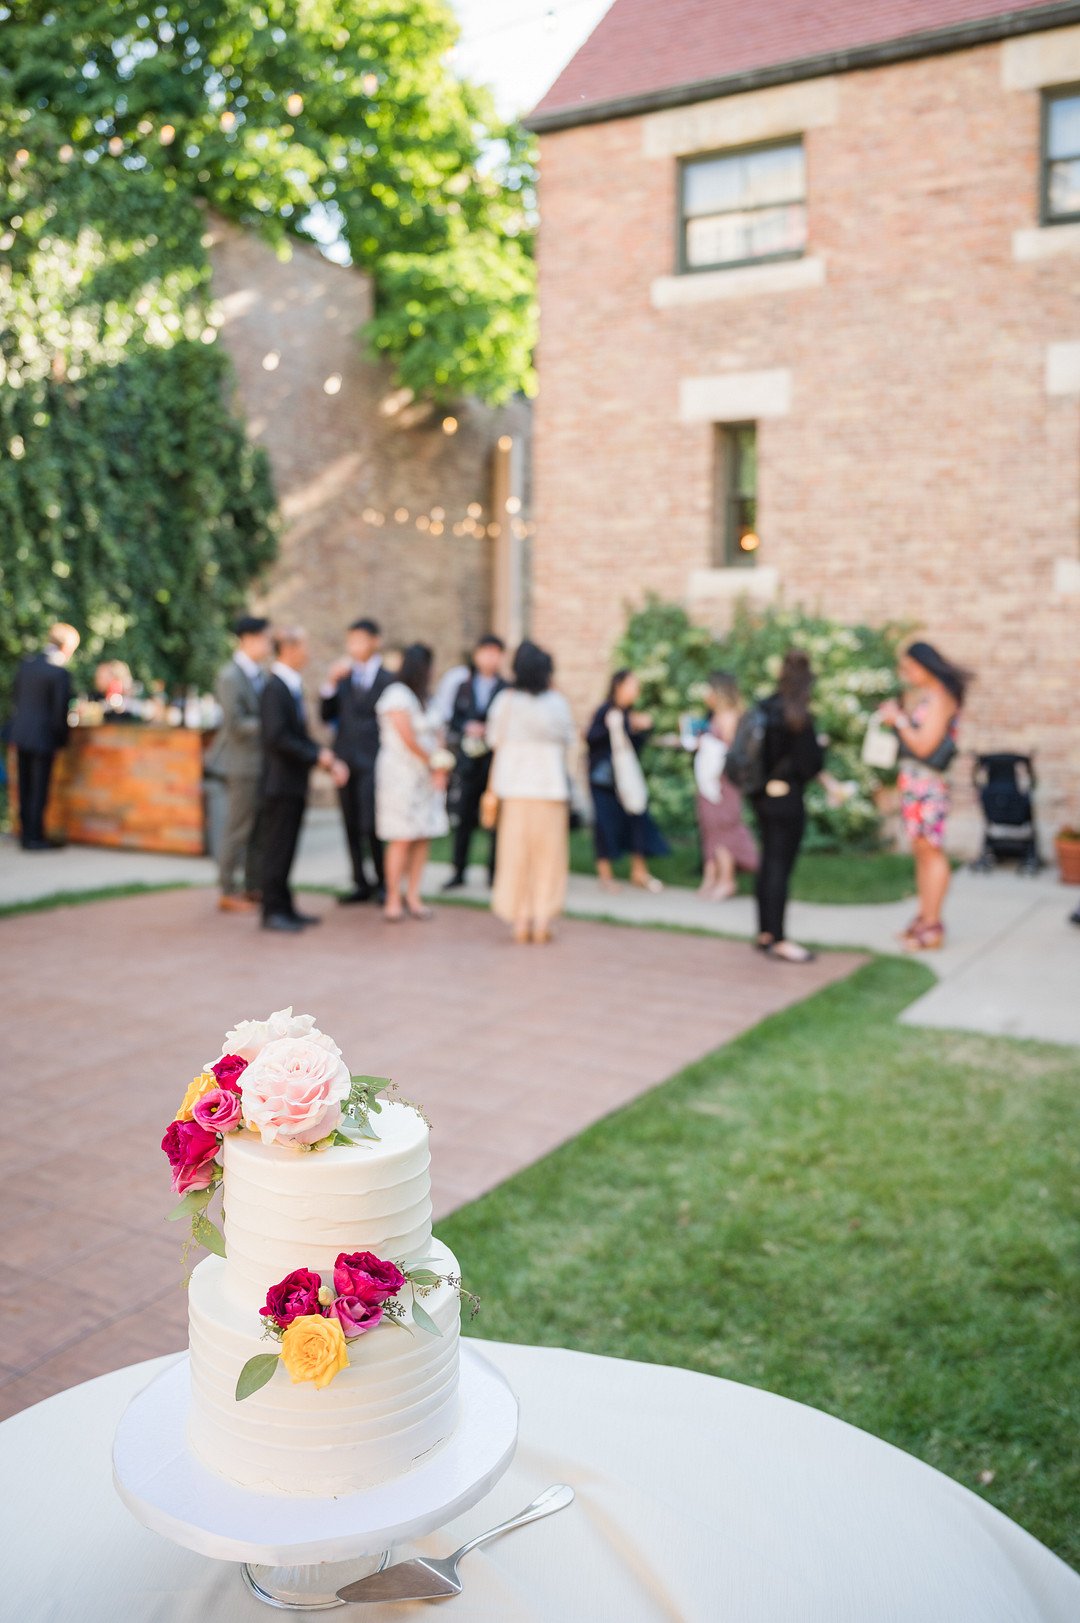 Chan_Chan_Winterlyn Photography_GLESSNER HOUSE CHICAGO WEDDING-97_low.jpg